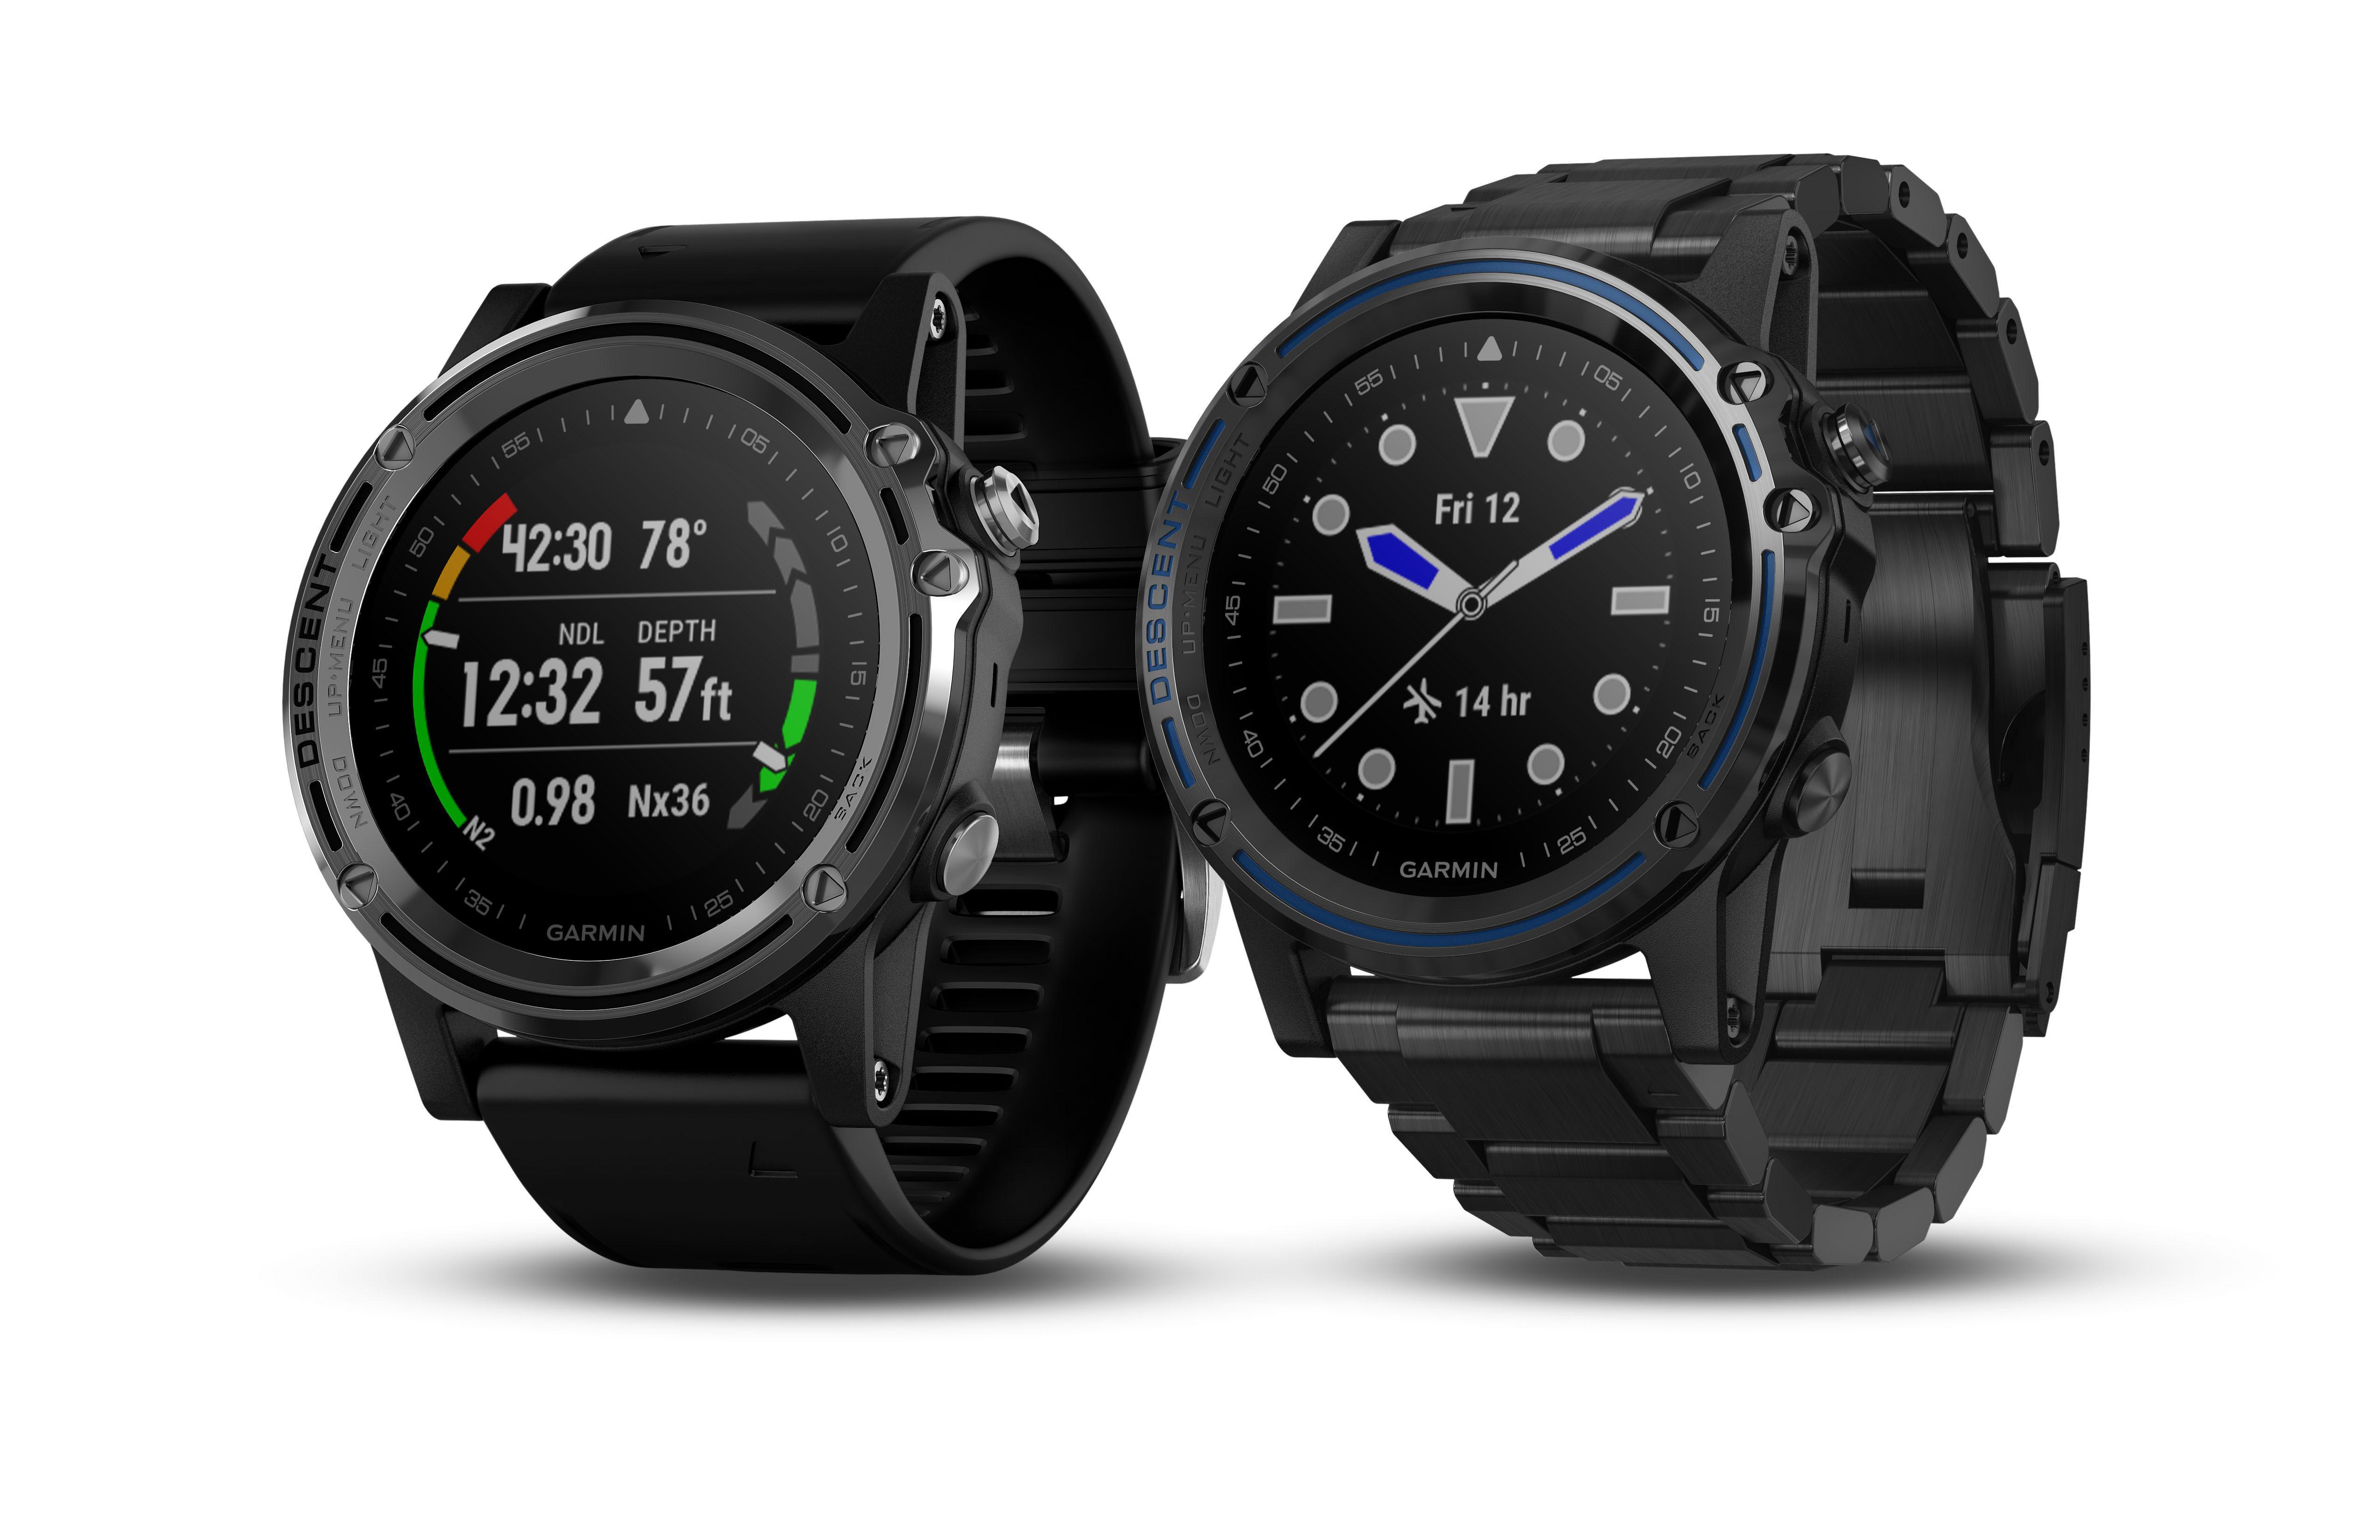 Garmin® debuts its first dive computer, the Descent Mk1, featuring